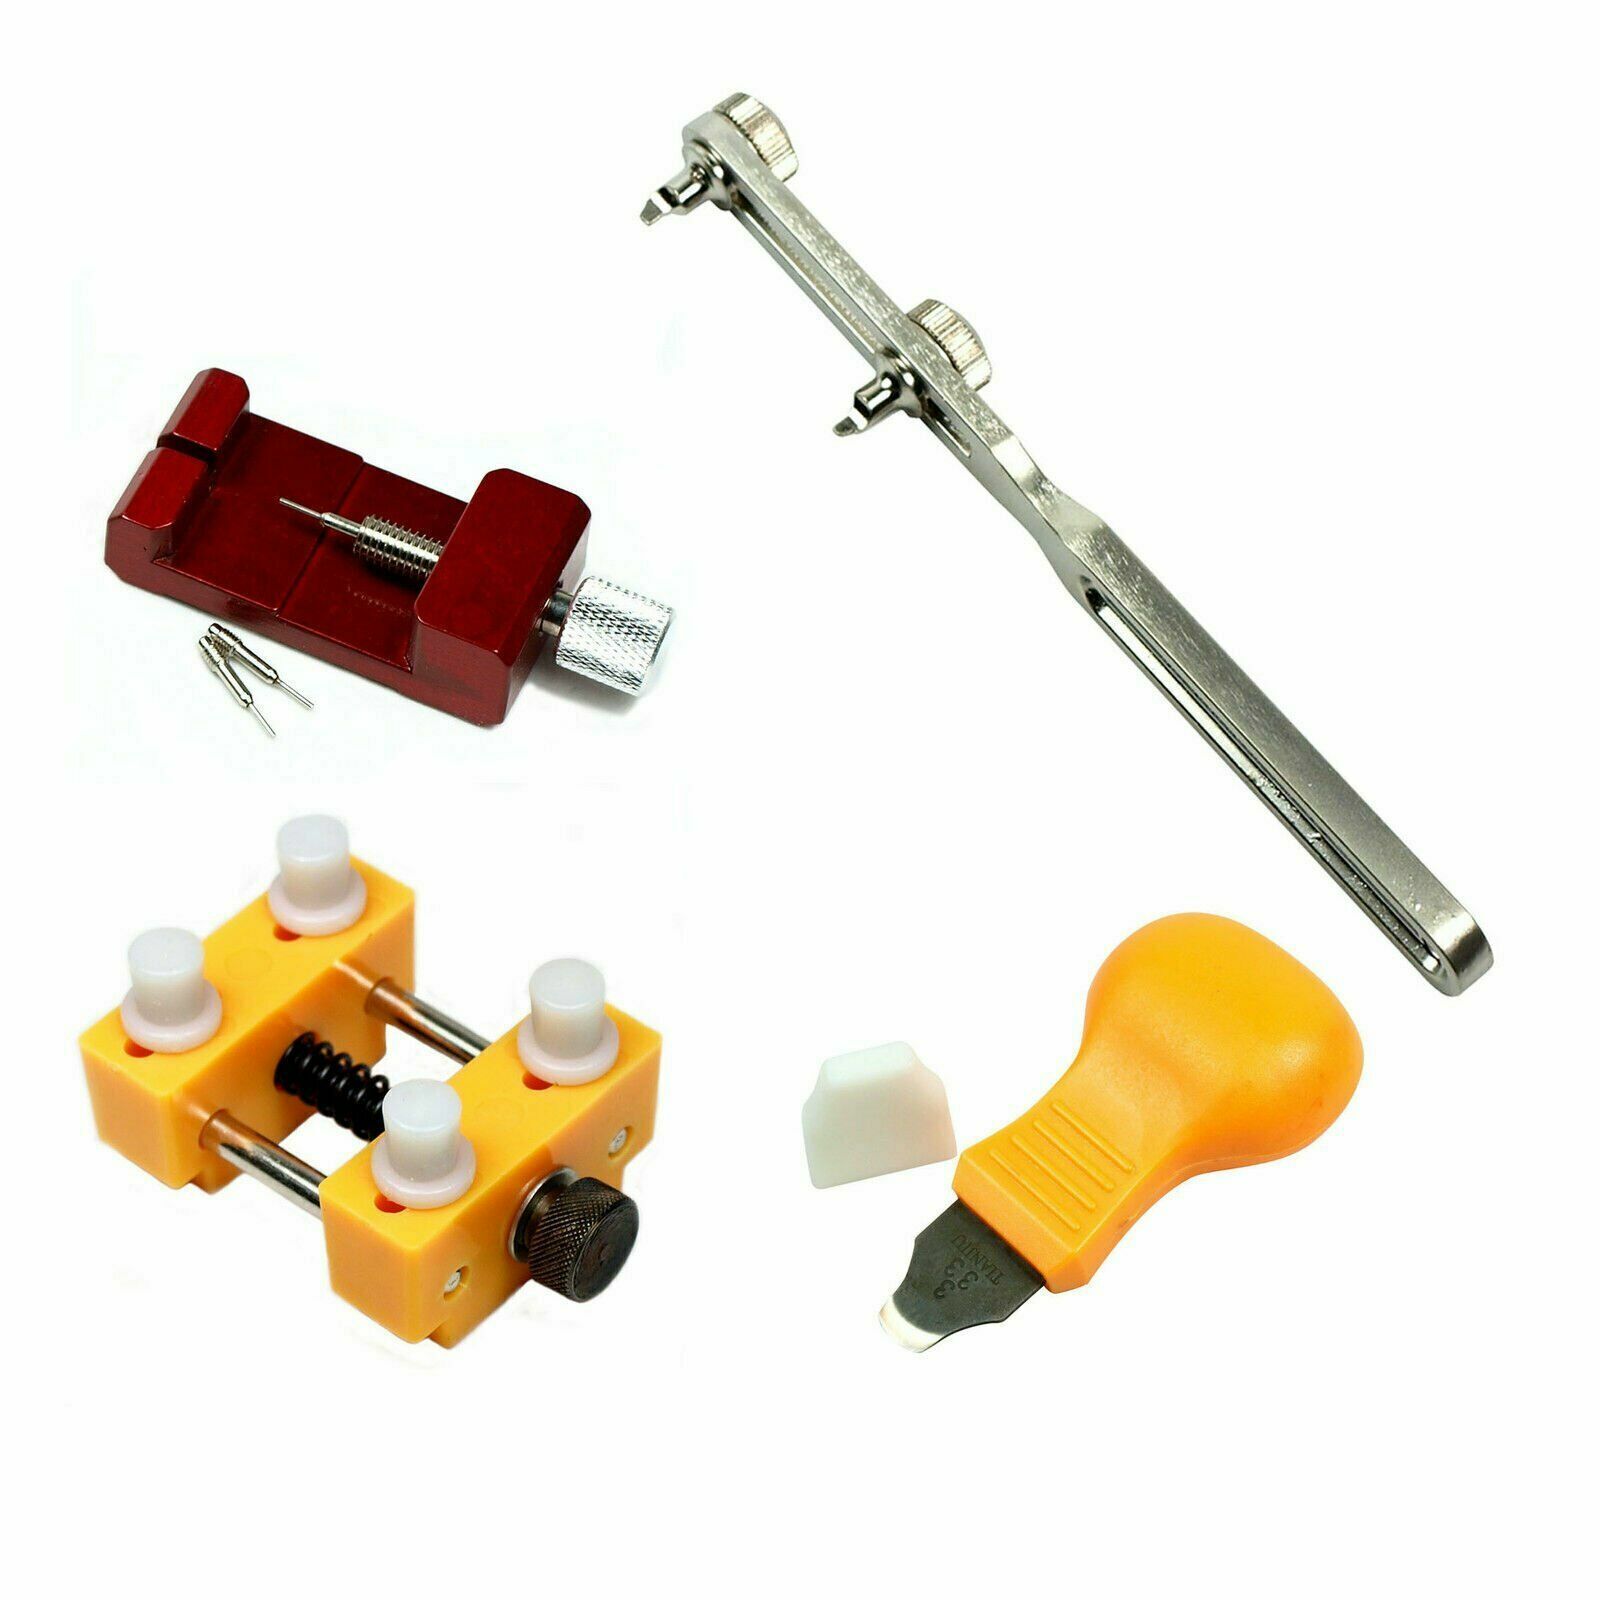 Watch Repair tool Kit - Case Opener Case Holder Link Pin Remover Case Knife